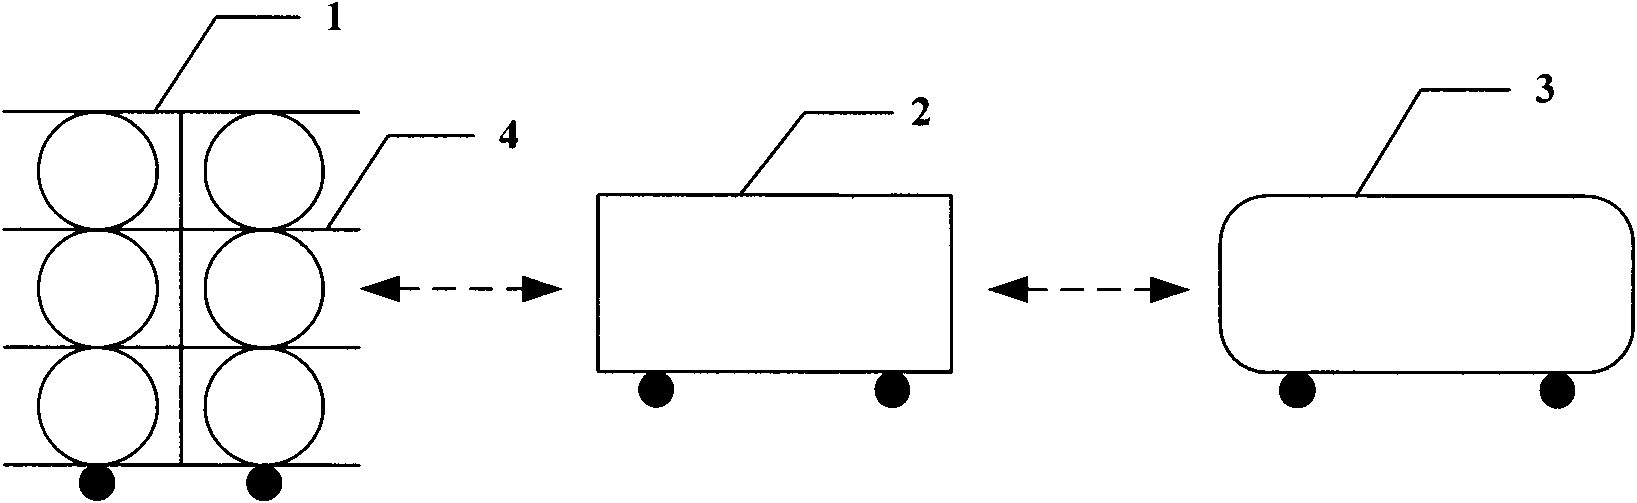 Fuel consumption assessment device for fuel cell vehicle